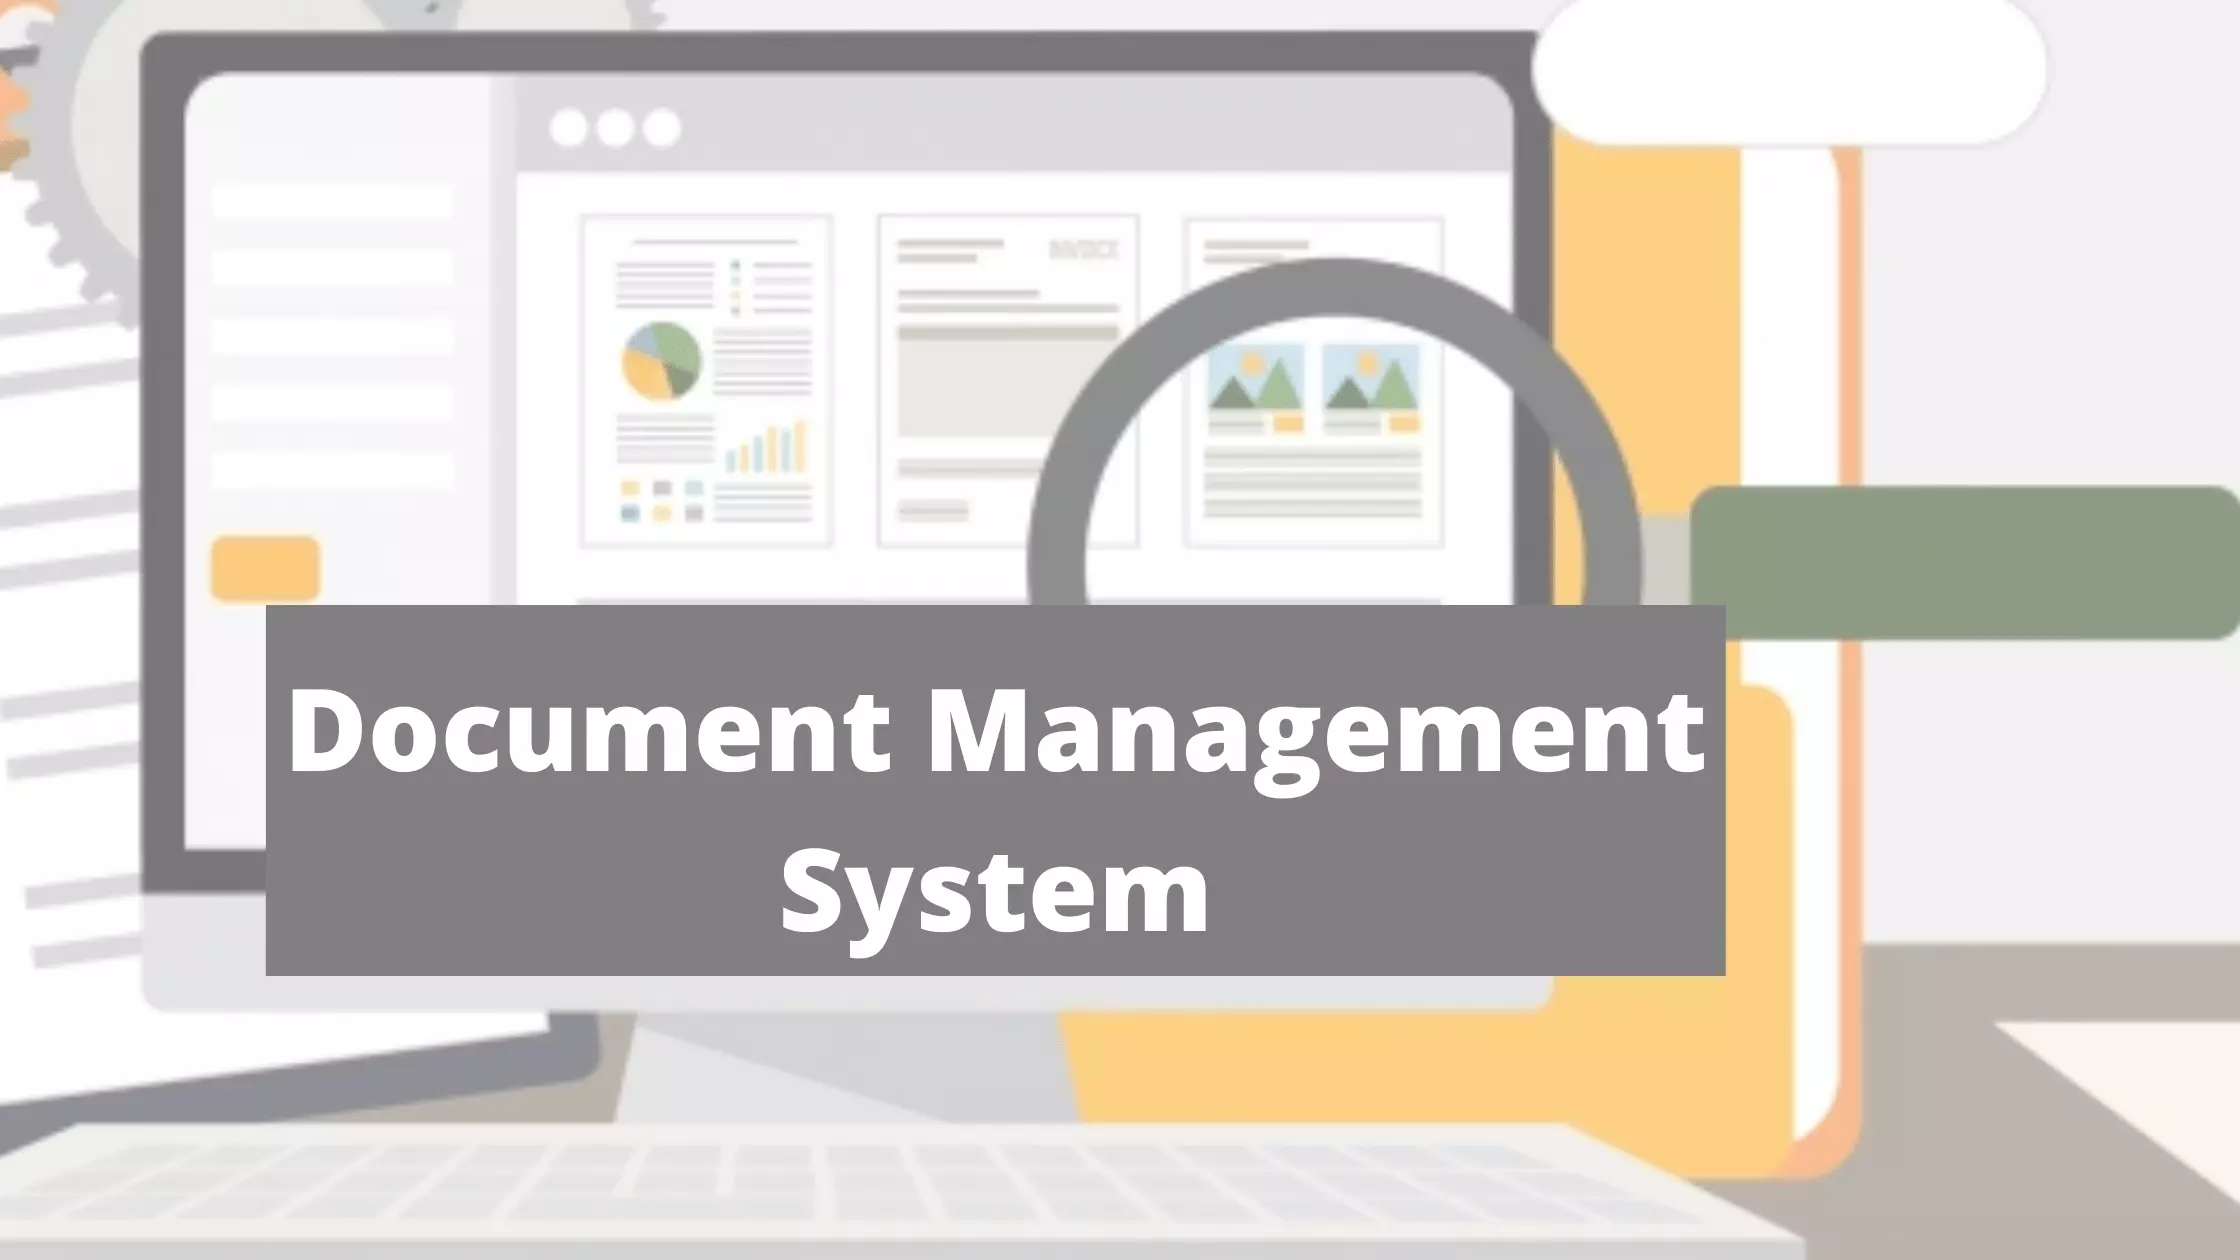 3 Things to Look For In a Legal Document Management System